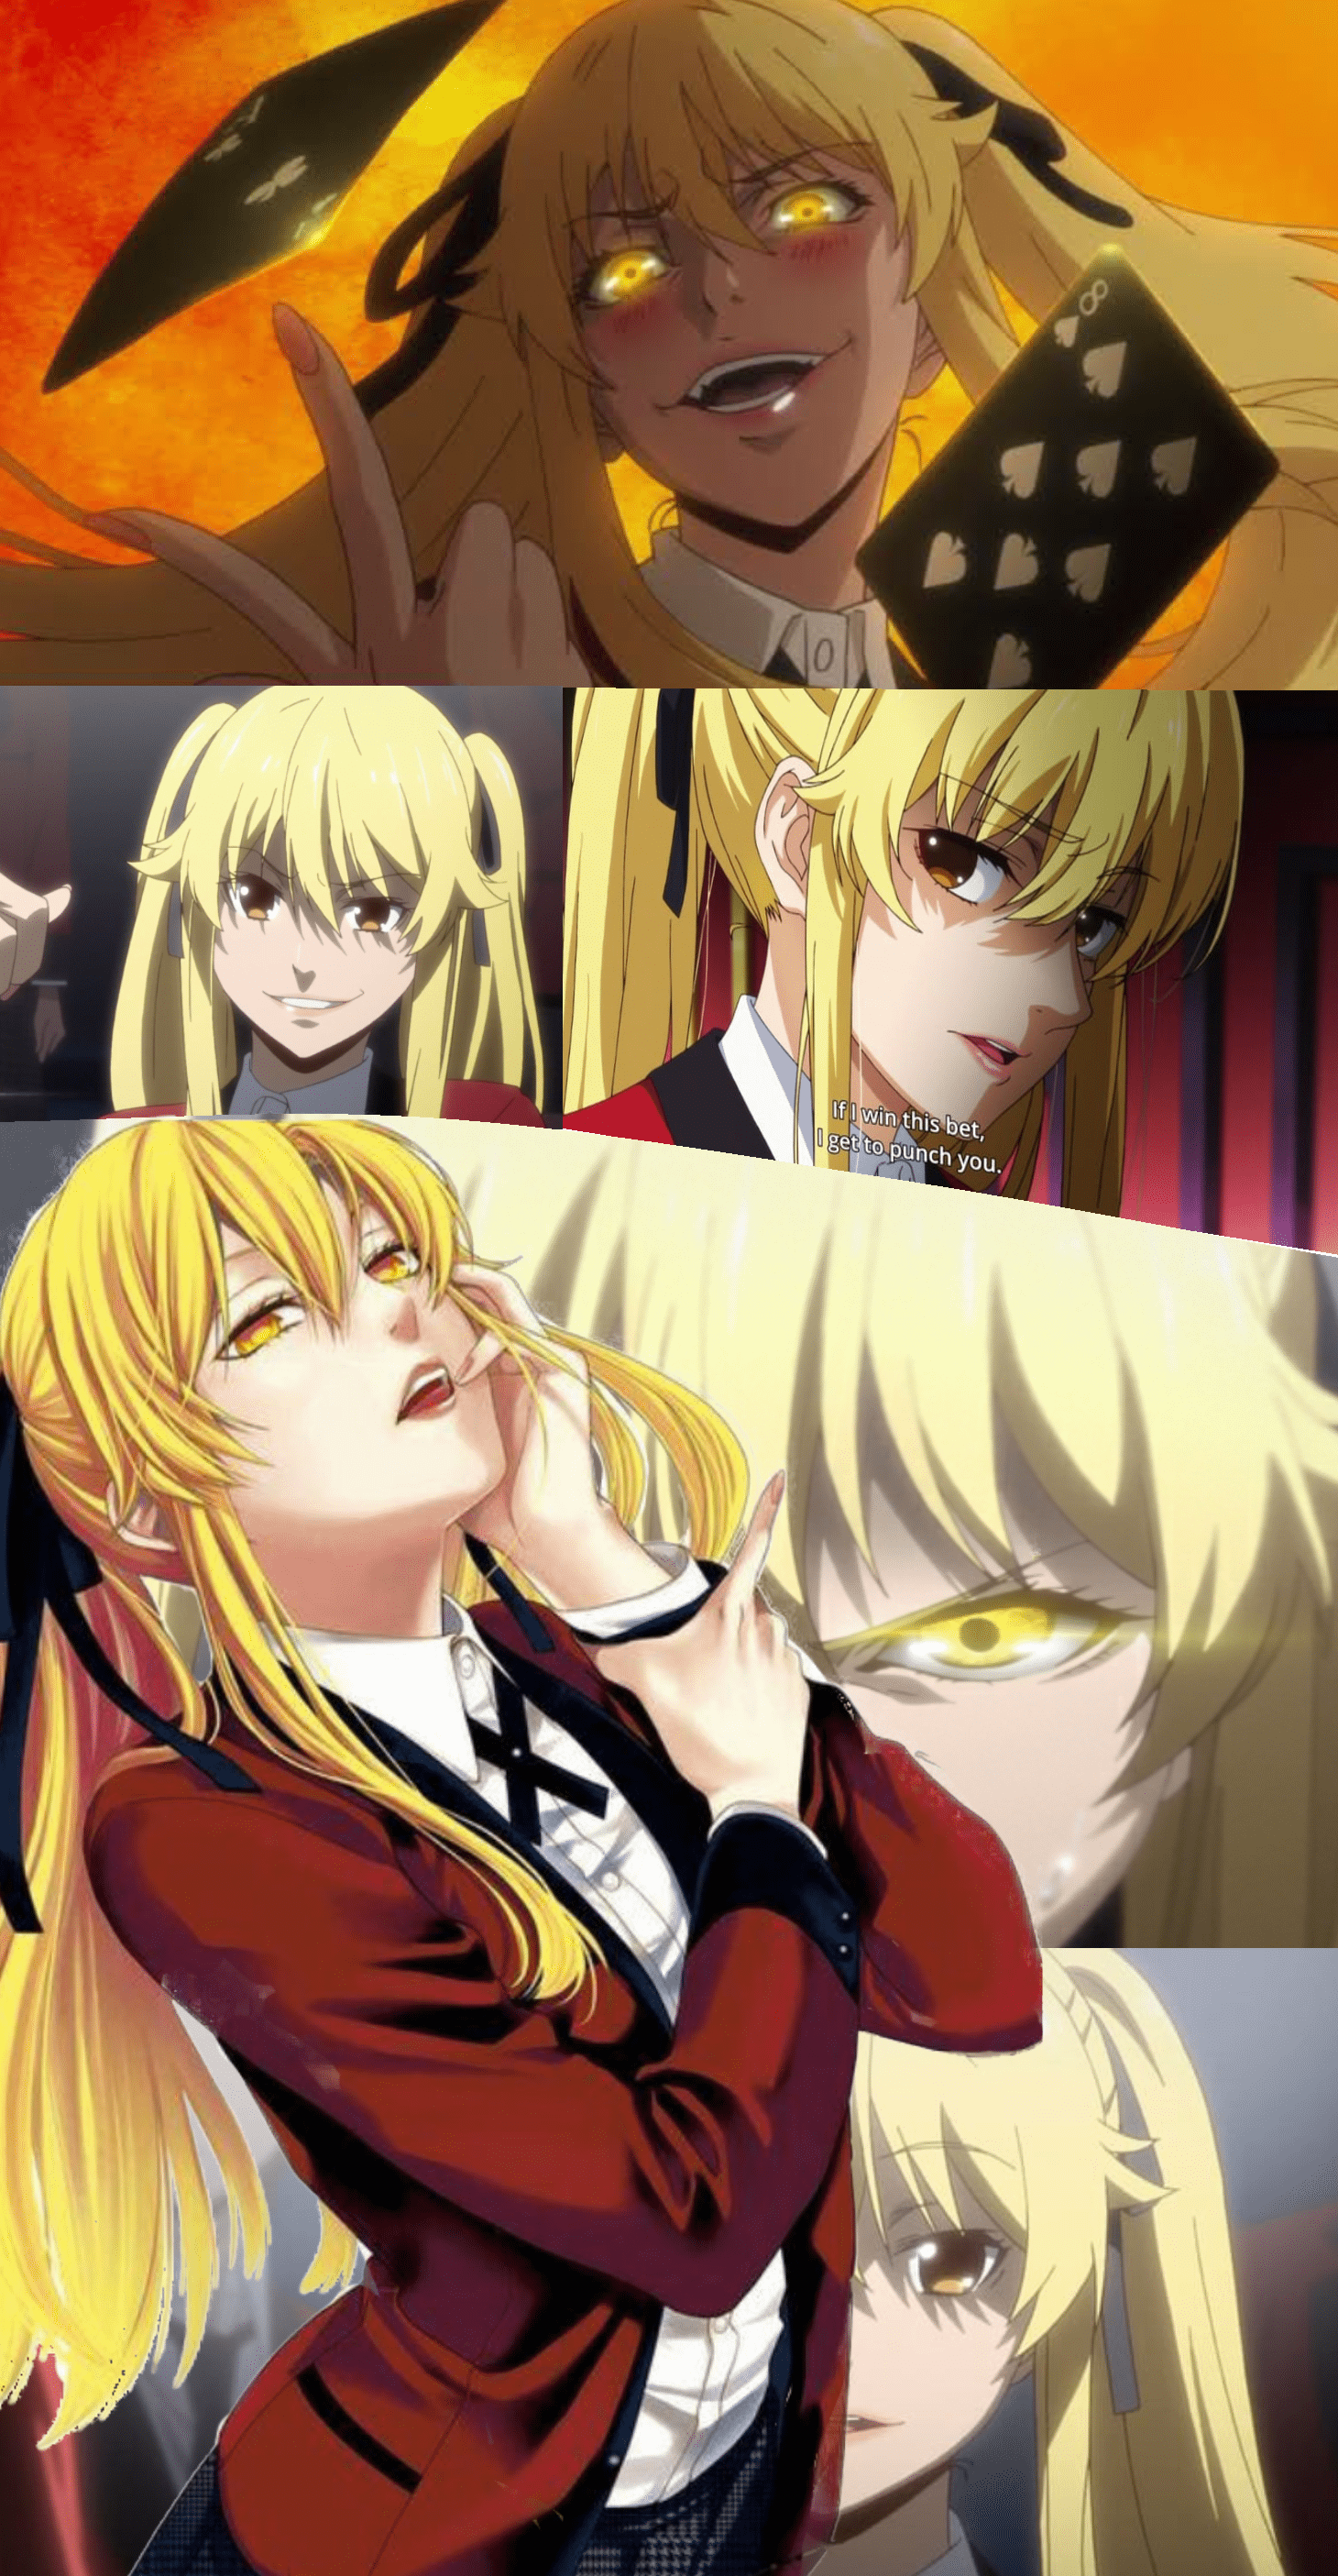 Featured image of post Live Wallpaper Anime Kakegurui : Try to avoid reposting, your post will be removed if it has already been posted in the last 6 months.